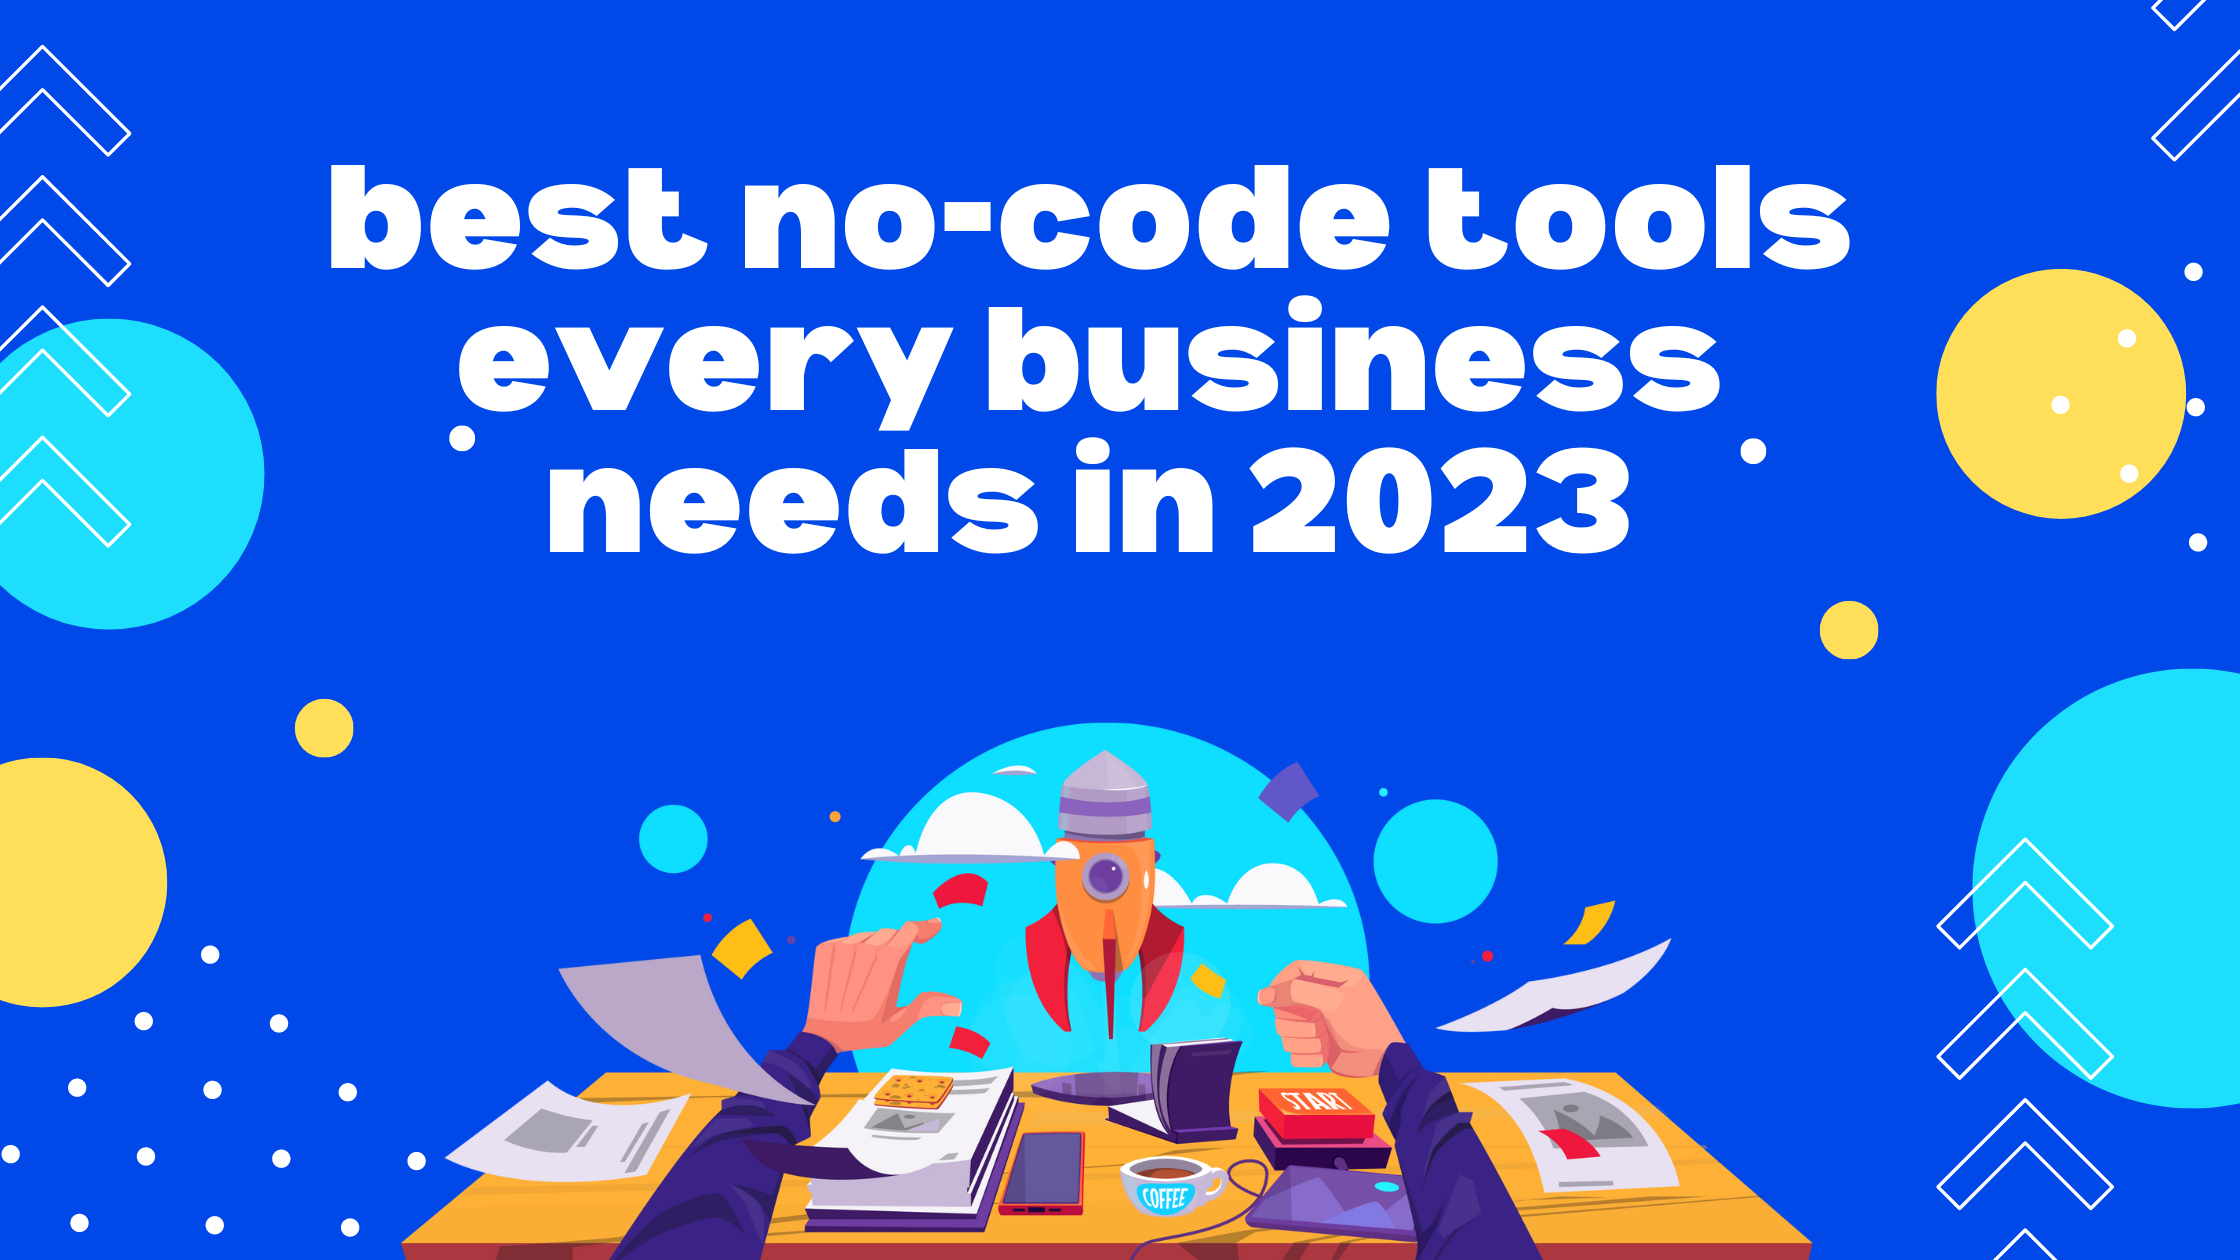 7 Best No Code Tools for Business in 2023